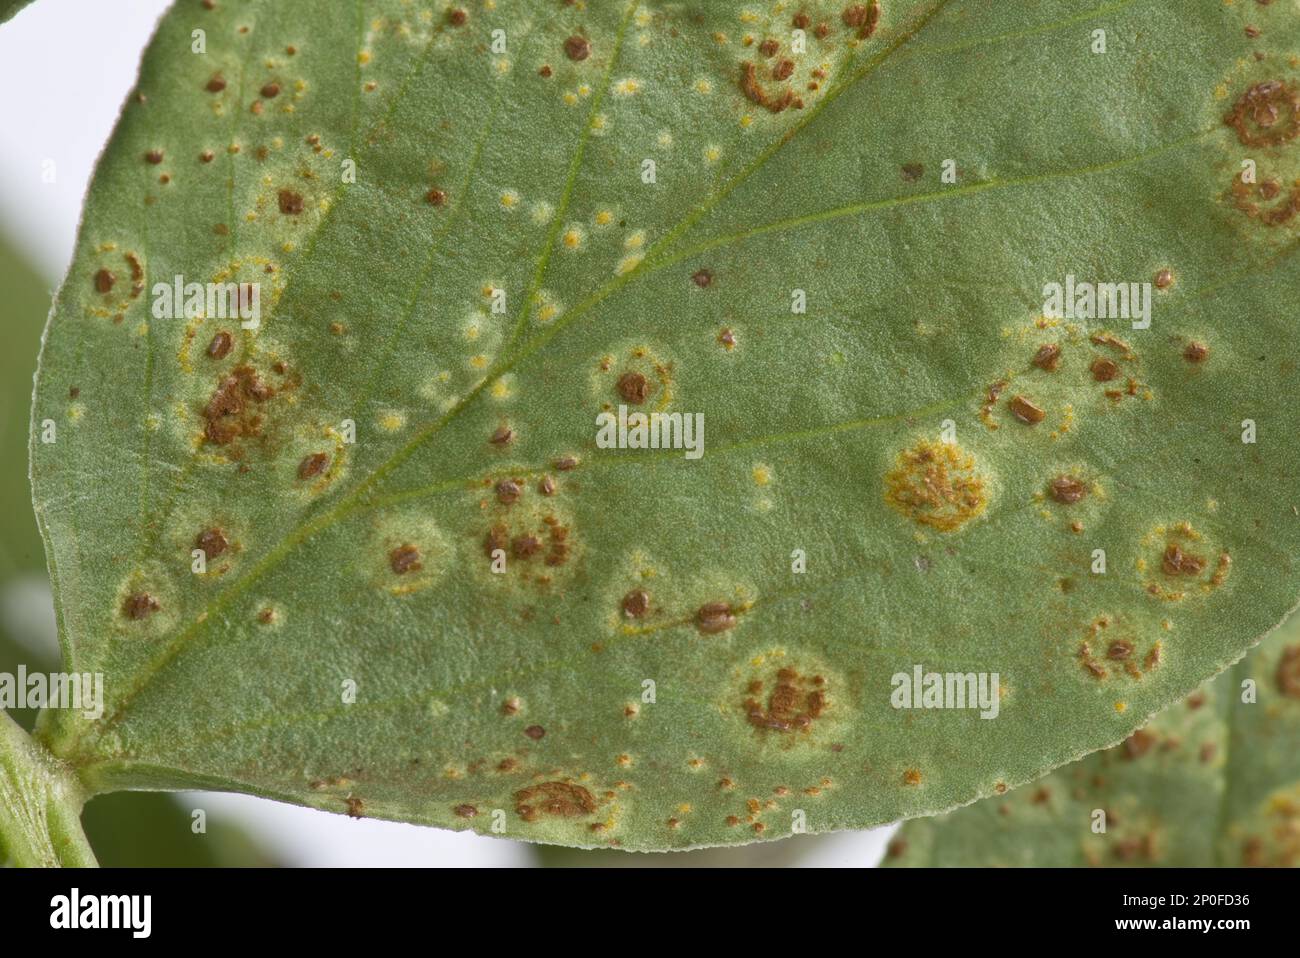 Faba or broad bean rust, Uromyces viciae-fabae, pustules on a broad bean leaf Stock Photo